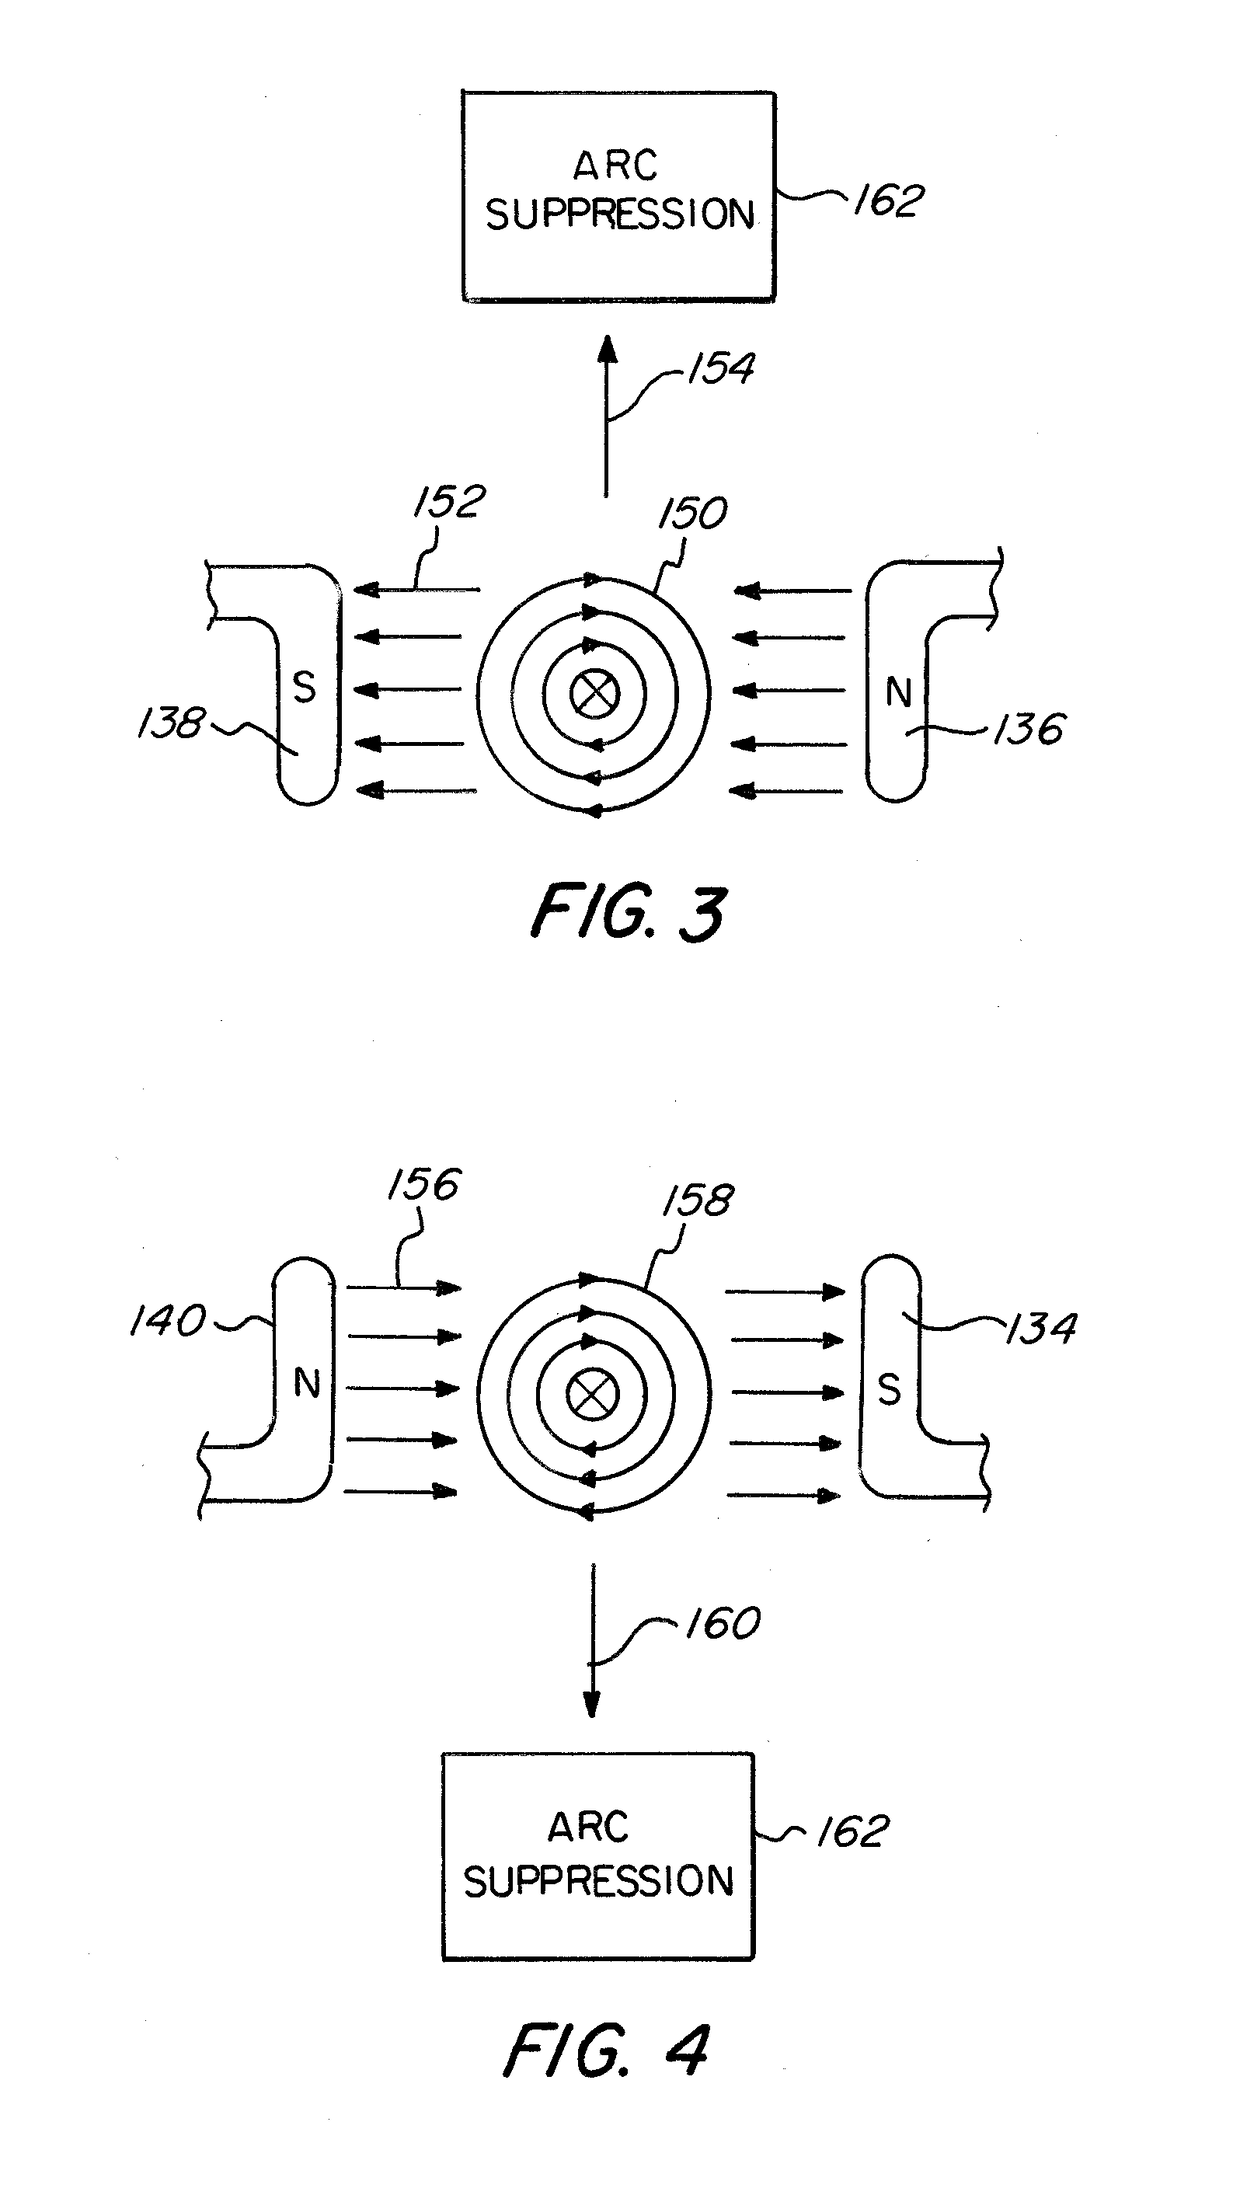 Arrangement for double break contact with electro-magnetic arc-blow